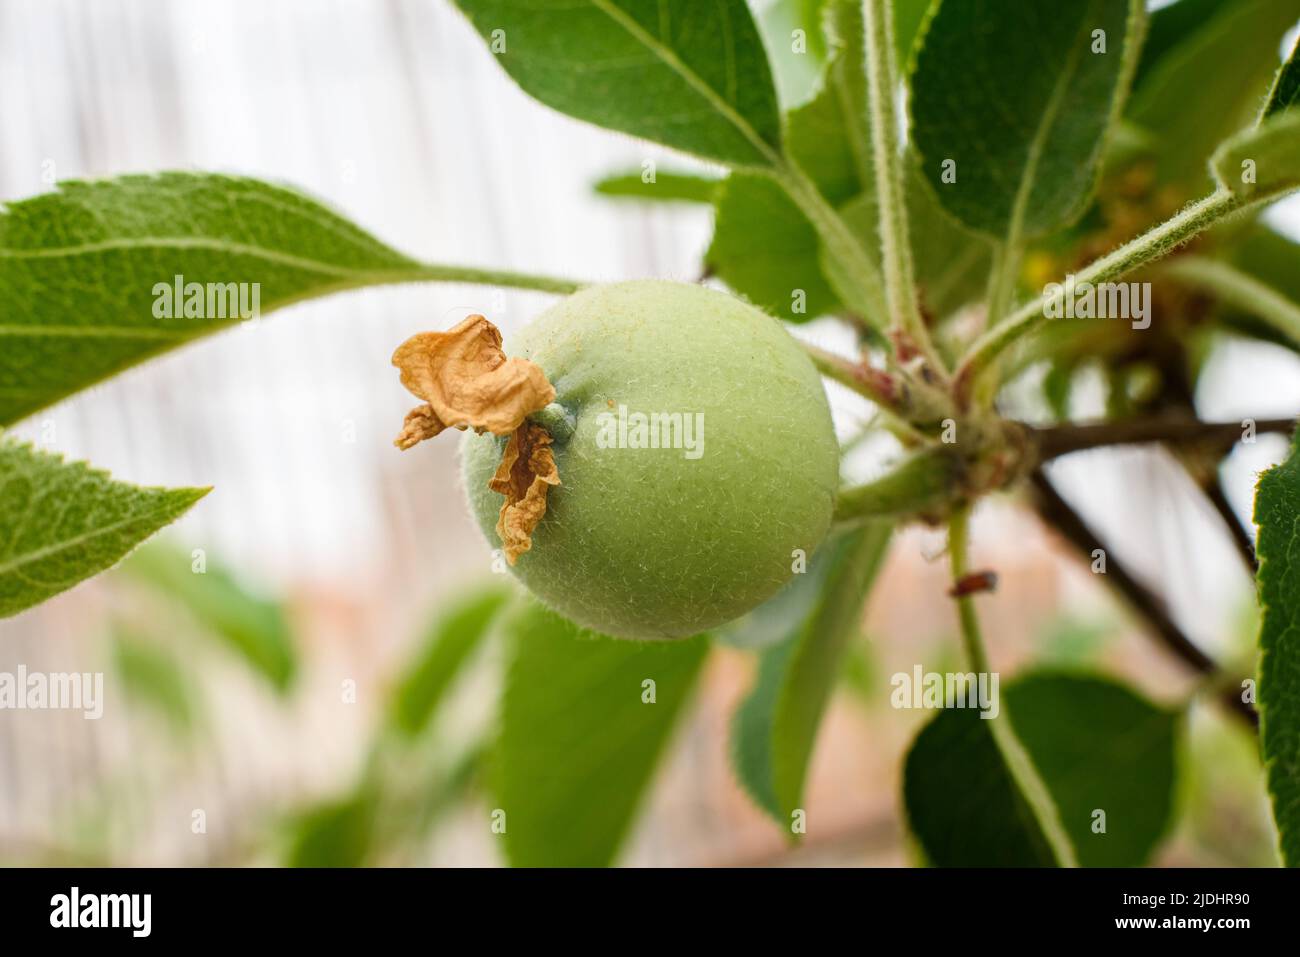 Apple buds, still green fruit growing on the tree. Stock Photo